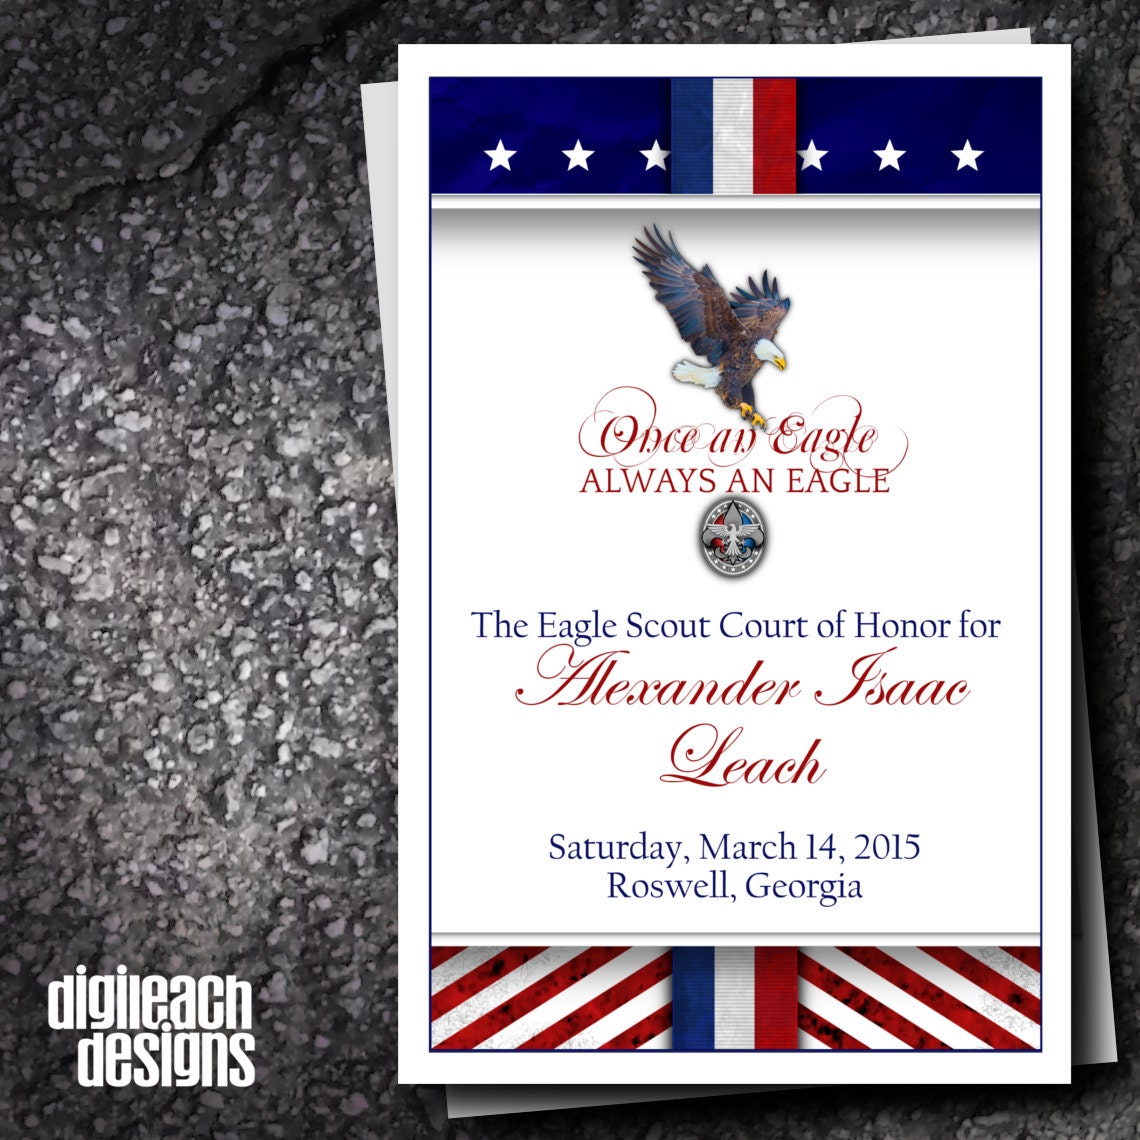 Eagle Scout Court of Honor Program Cover by DigileachDesigns